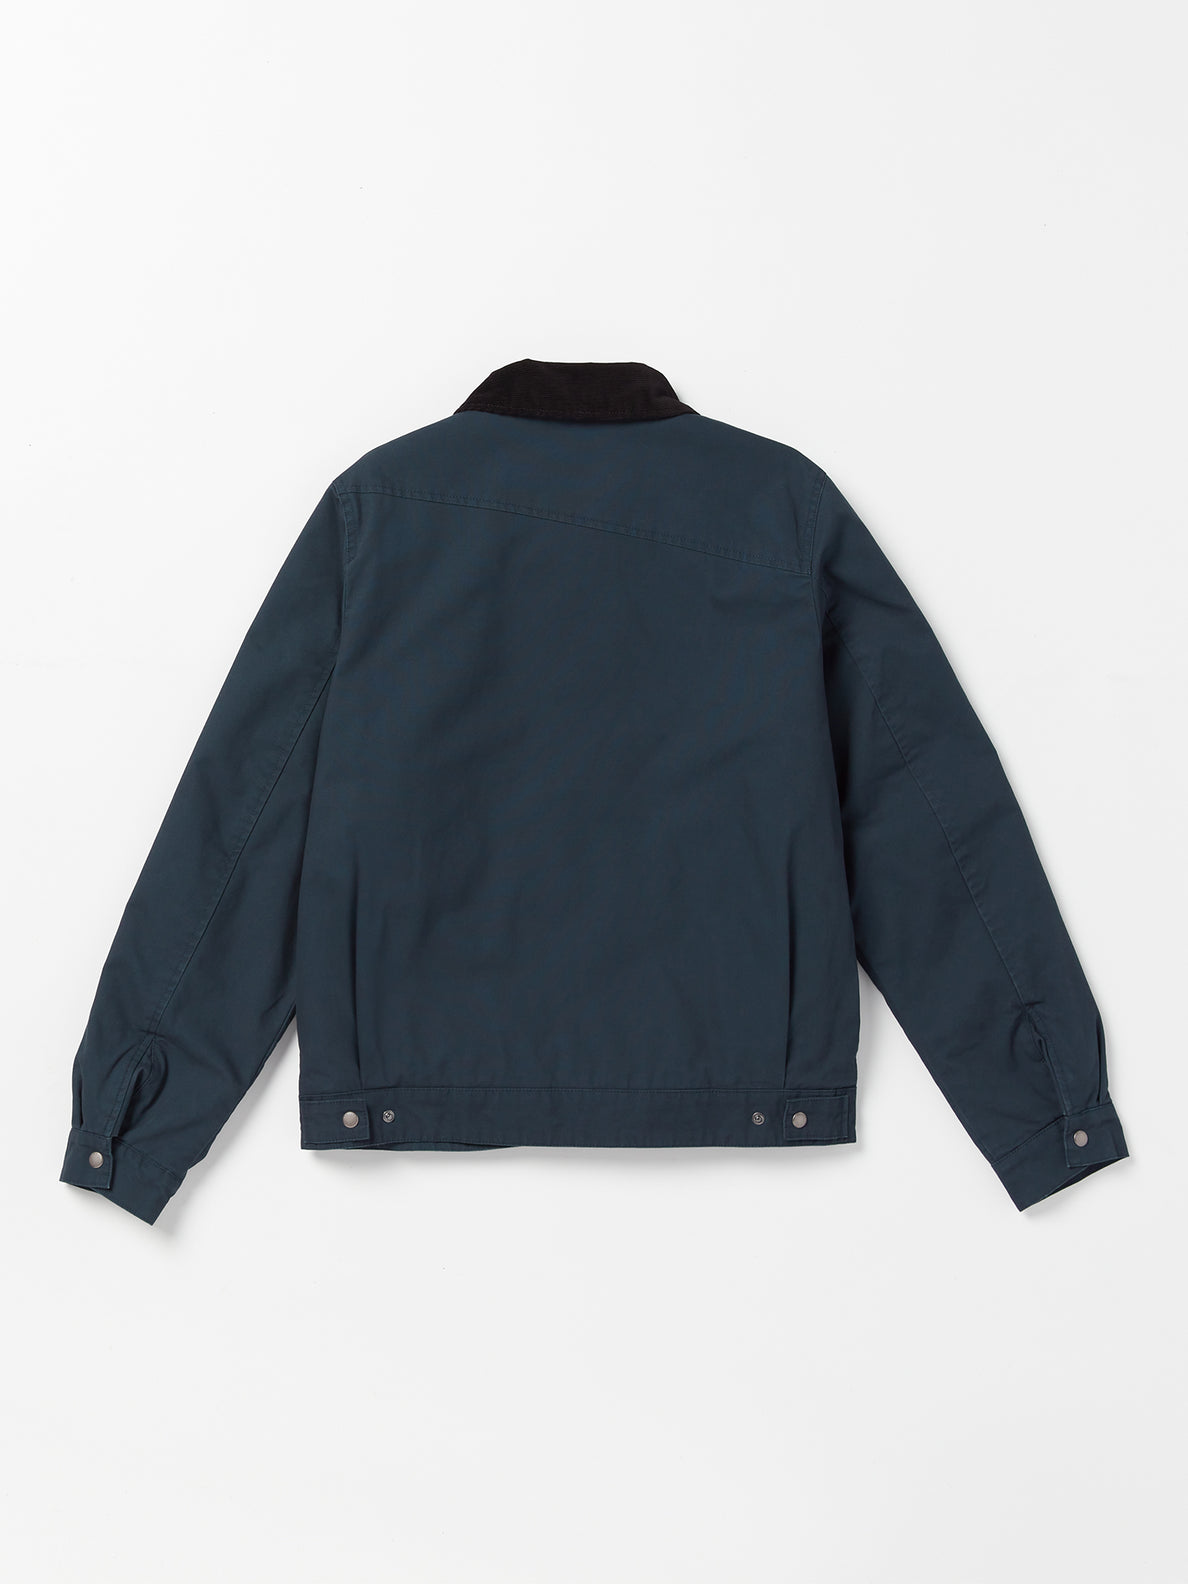 Voider Lined Jacket - Navy (A1732309_NVY) [B]